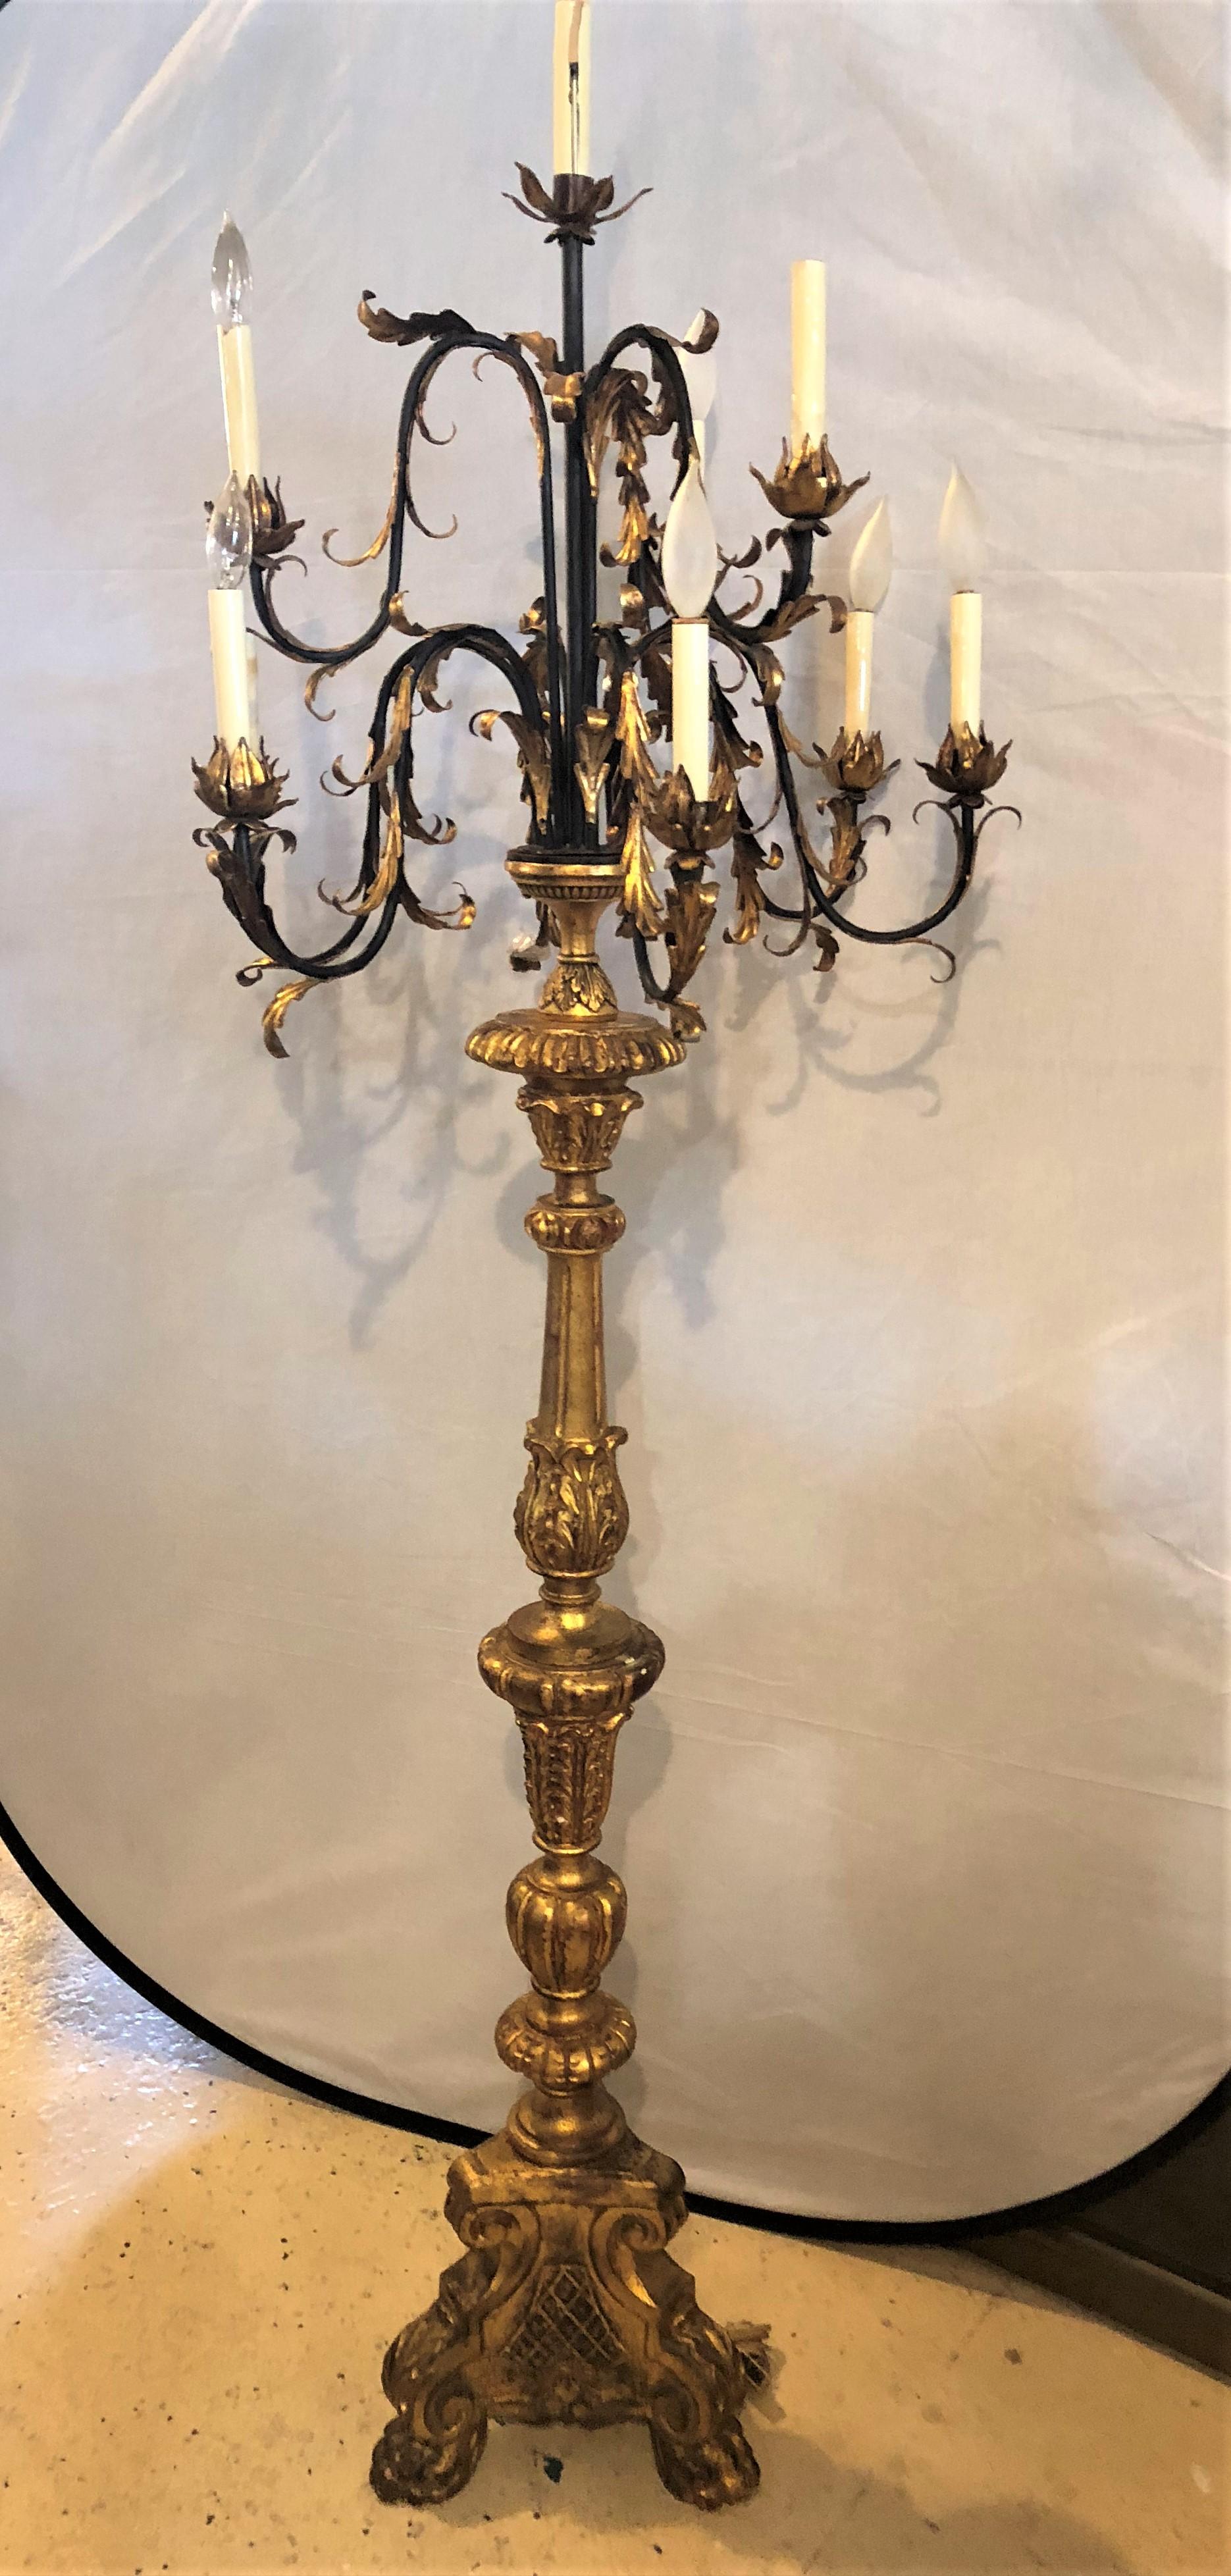 An Italian ten-light giltwood and iron torchiere. This fantastic antique standing light has a wonderfully warm worn gilt gold finish over clay. The tri legged base supporting a center column-form single pedestal having multiple flowing arms with ten